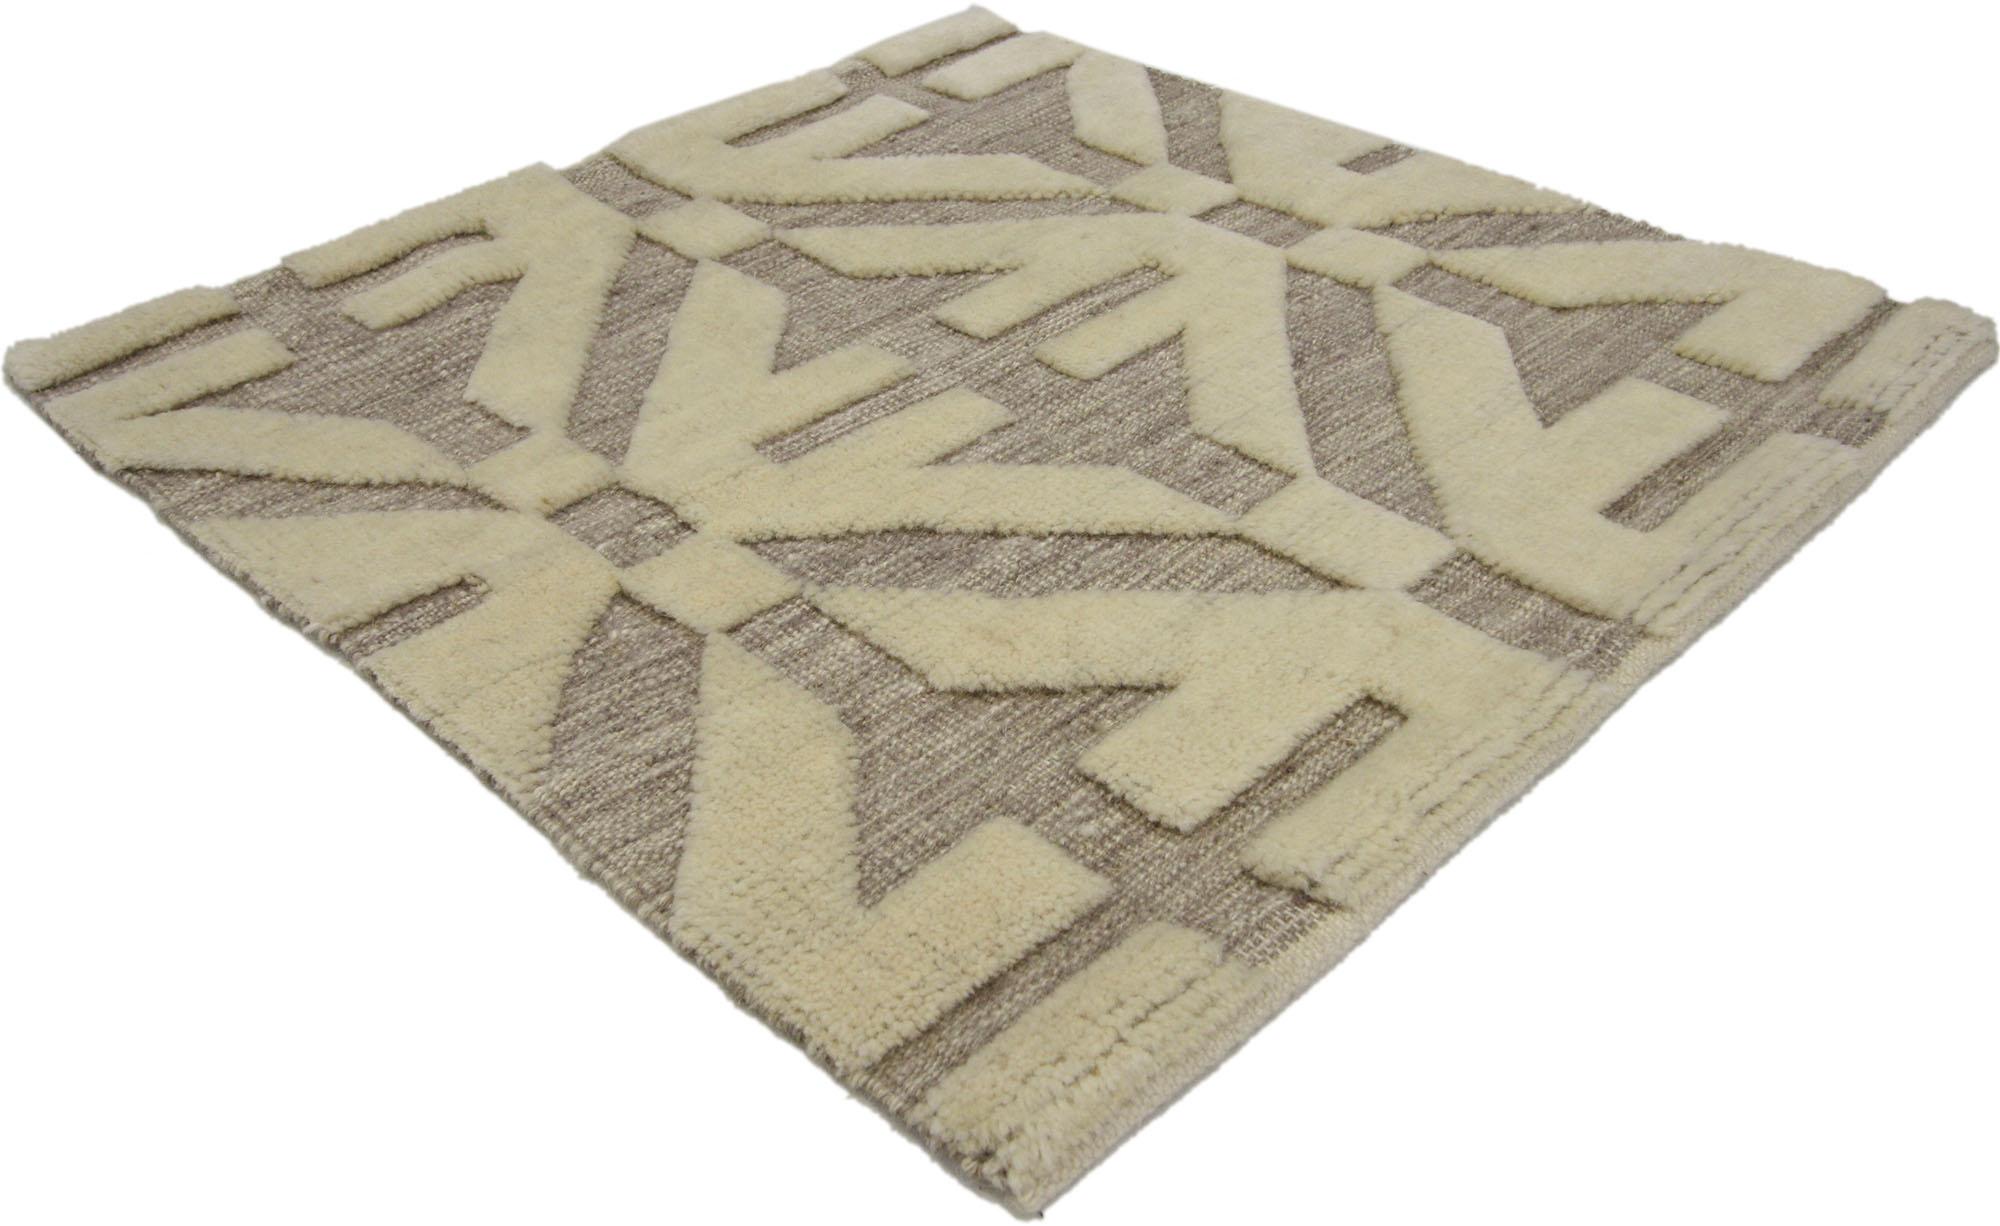 30400 Modern Geometric High-Low Wagireh Rug, 02'02 x 02'02. Contemporary sampler wagireh rugs from India are a modern interpretation of traditional wagireh rugs, employing the intricate weaving technique of creating small sample designs on a larger